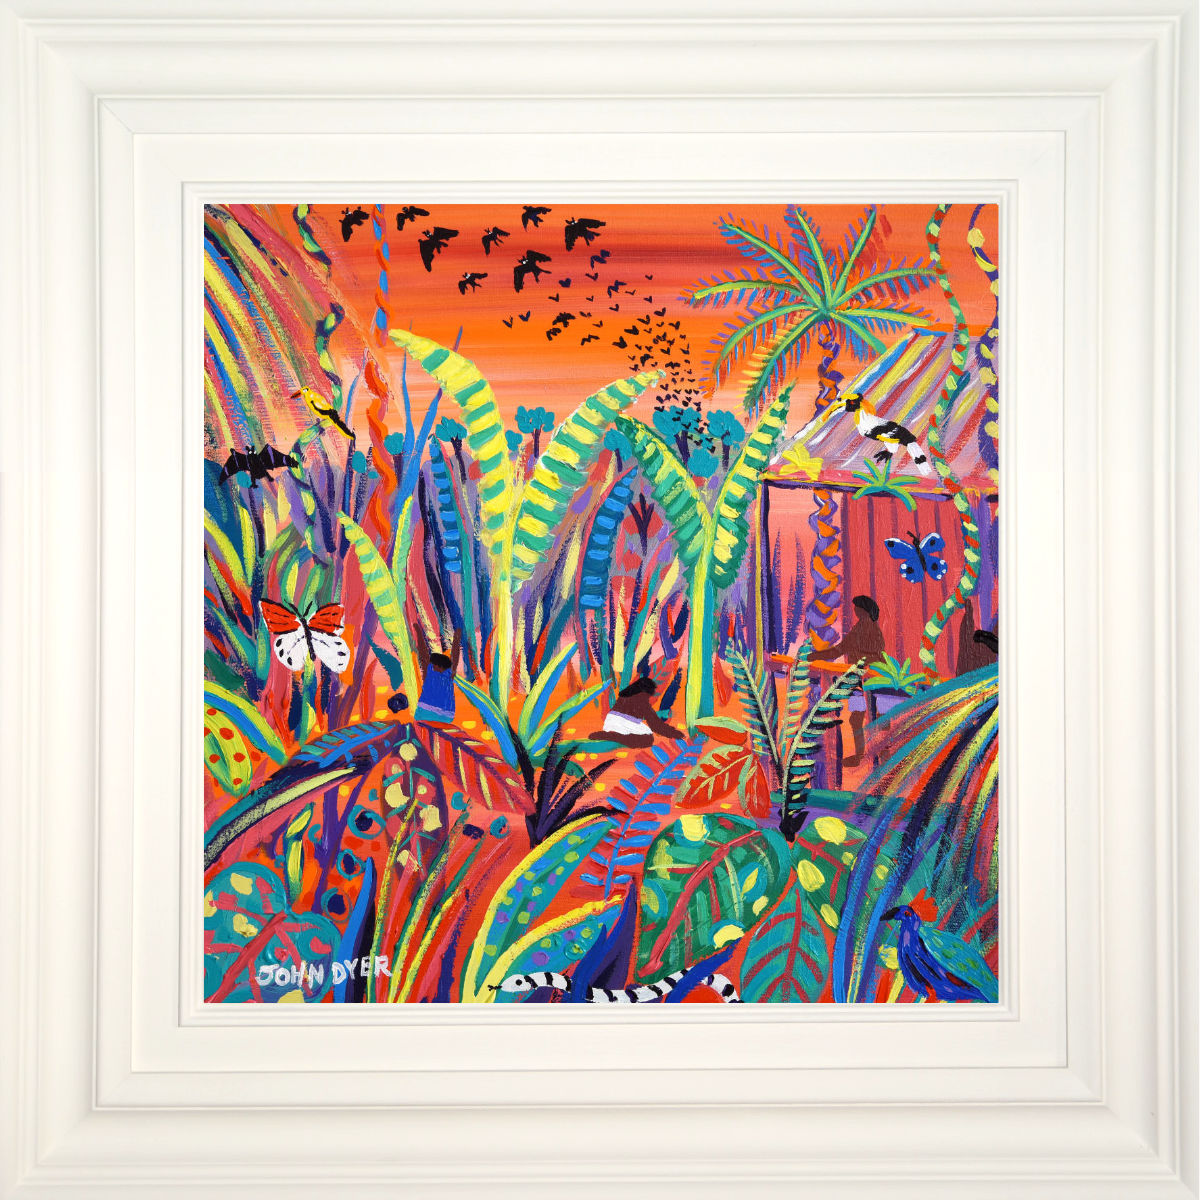 'Borneo Rainforest Sunset', 18x18 inches acrylic on canvas. Borneo Jungle Painting by Environmental Artist John Dyer. Cornwall Art Gallery